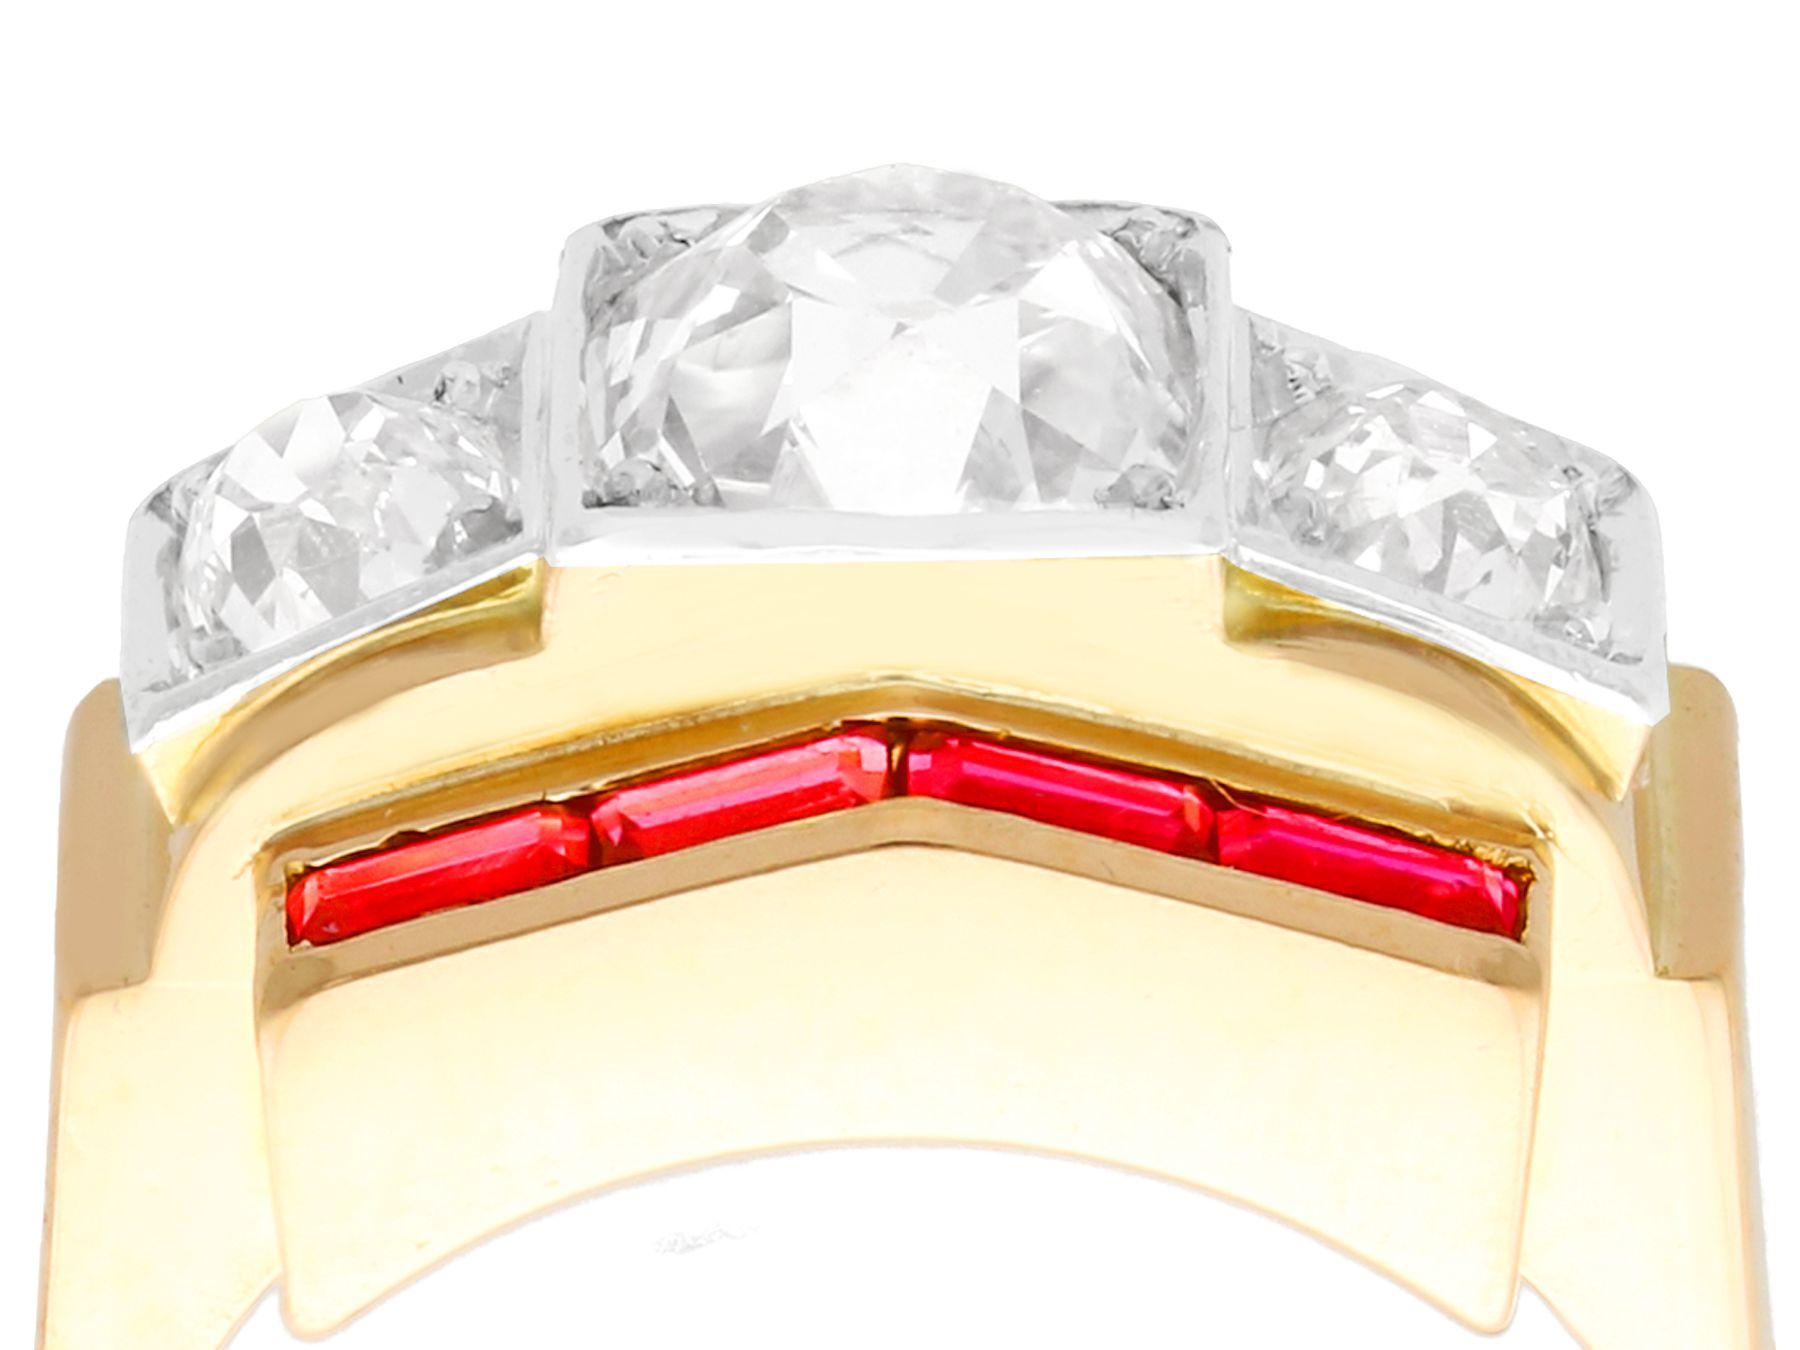 A stunning, fine and impressive vintage French 2.28 carat diamond and 0.52Ct Ruby, 18 karat yellow gold and platinum set cocktail ring; part of our diverse vintage jewelry and estate jewelry collections.

This stunning, fine and impressive vintage